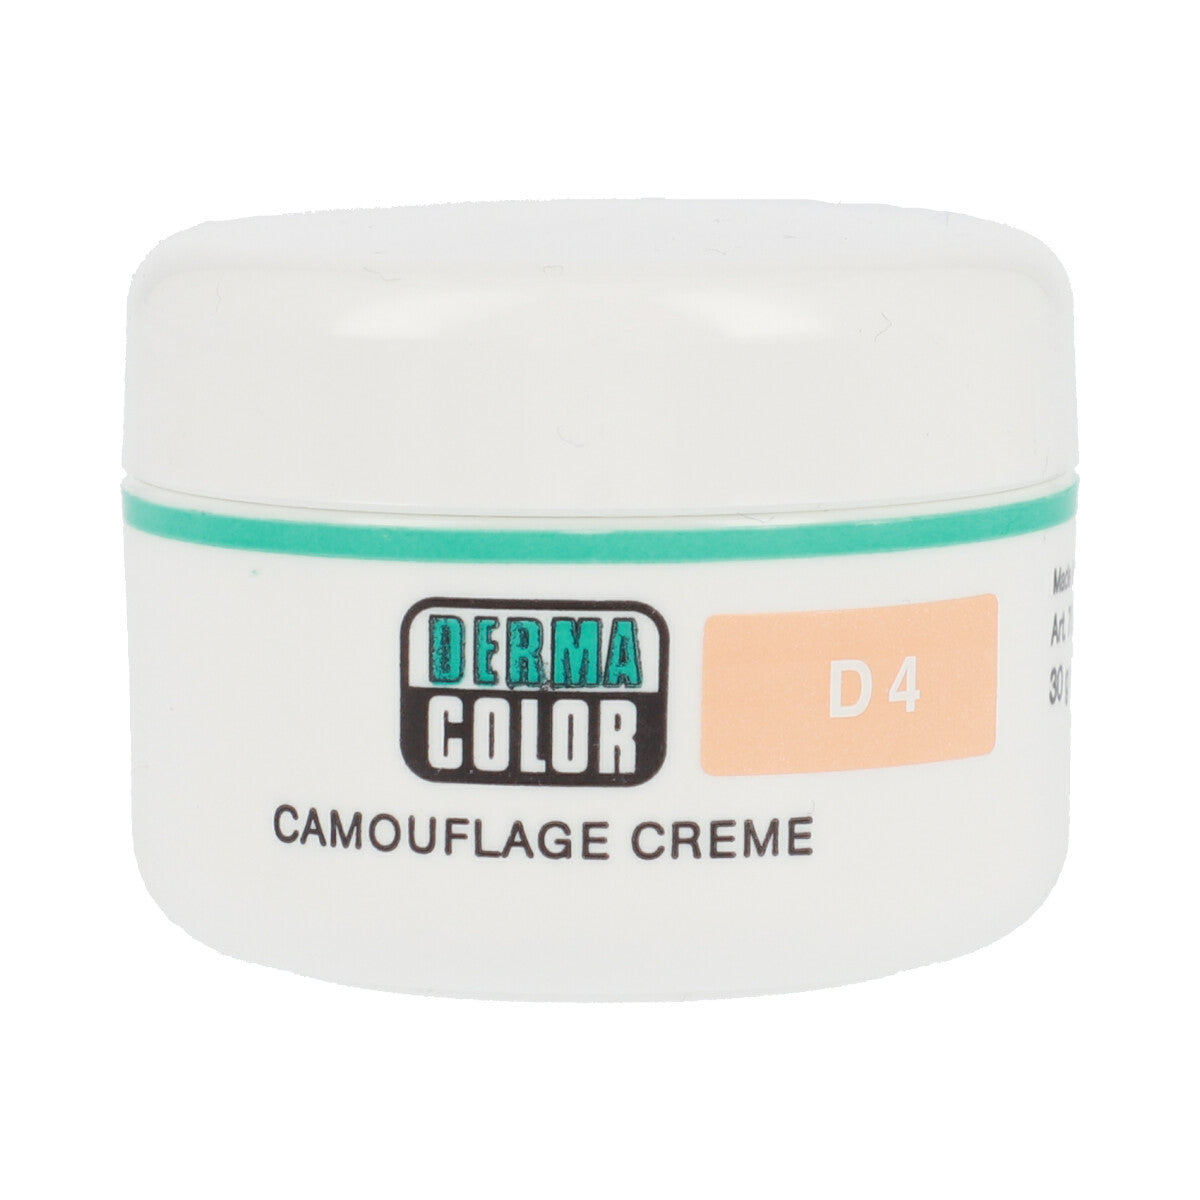 Camouflage Creme D4 - 30 G